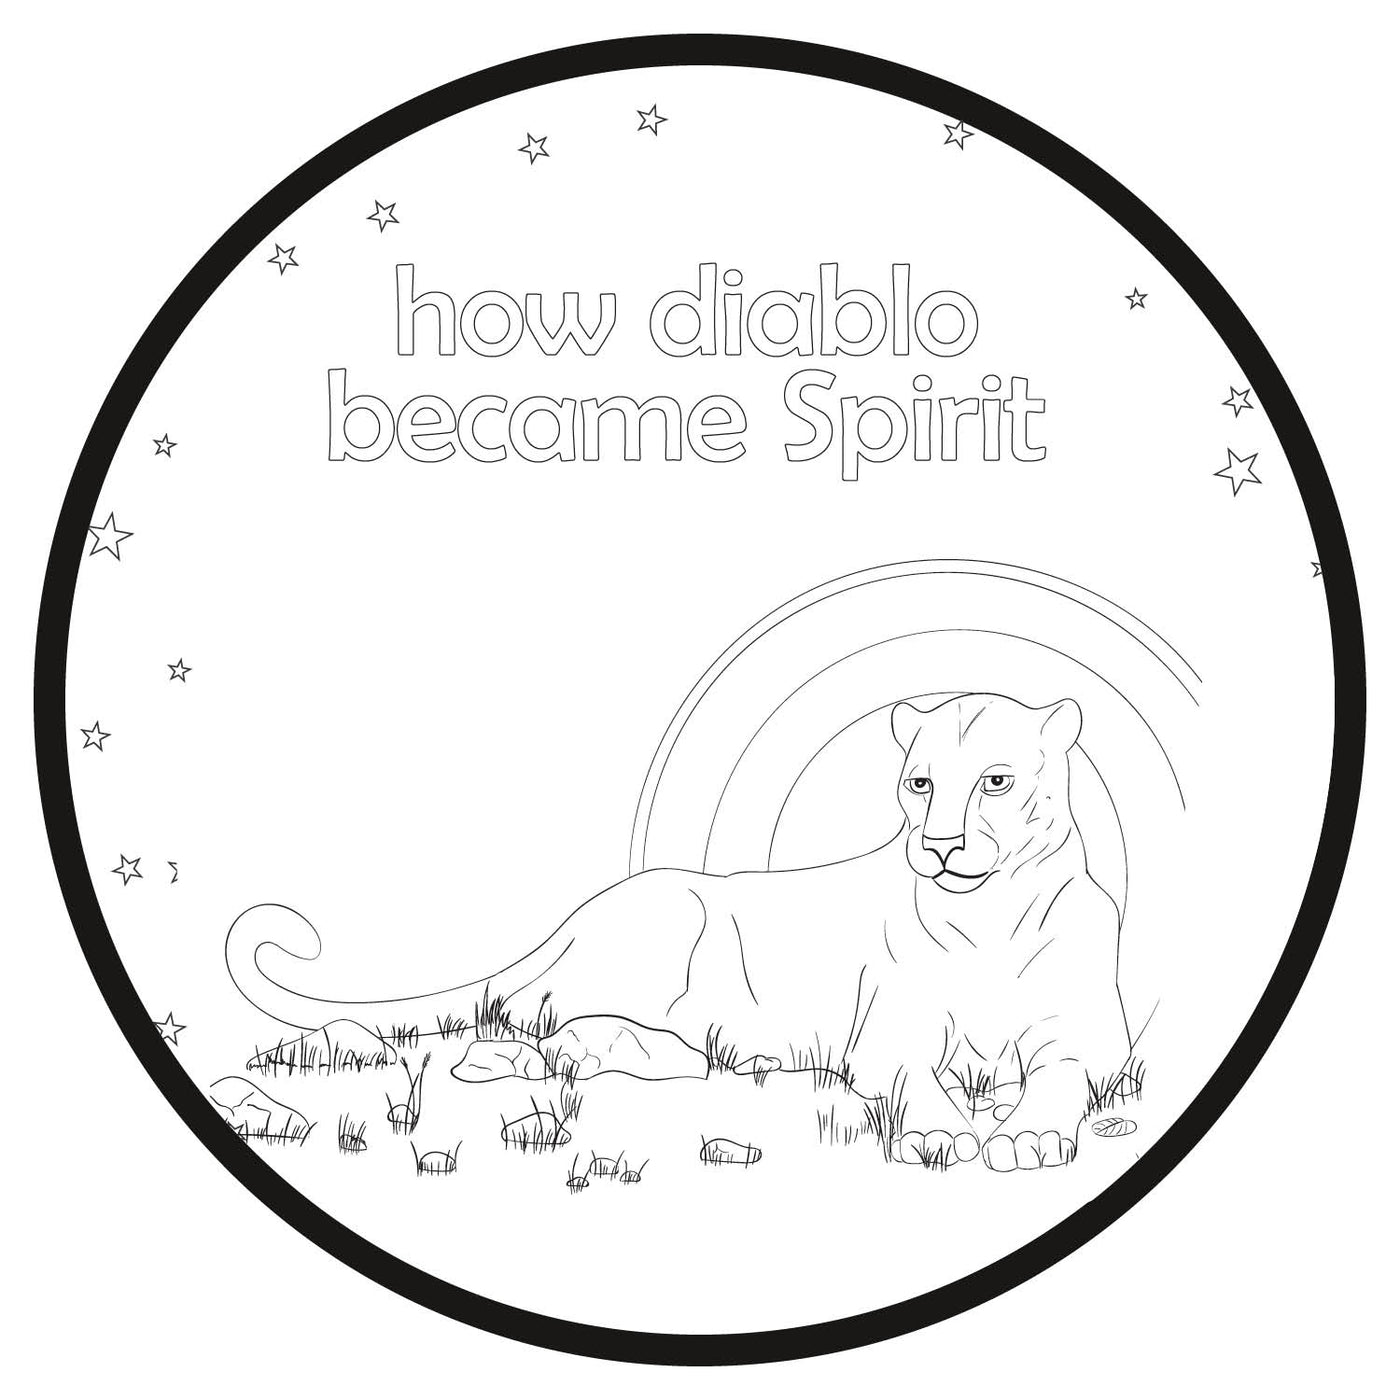 Printable Coloring Pages - How Diablo became Spirit